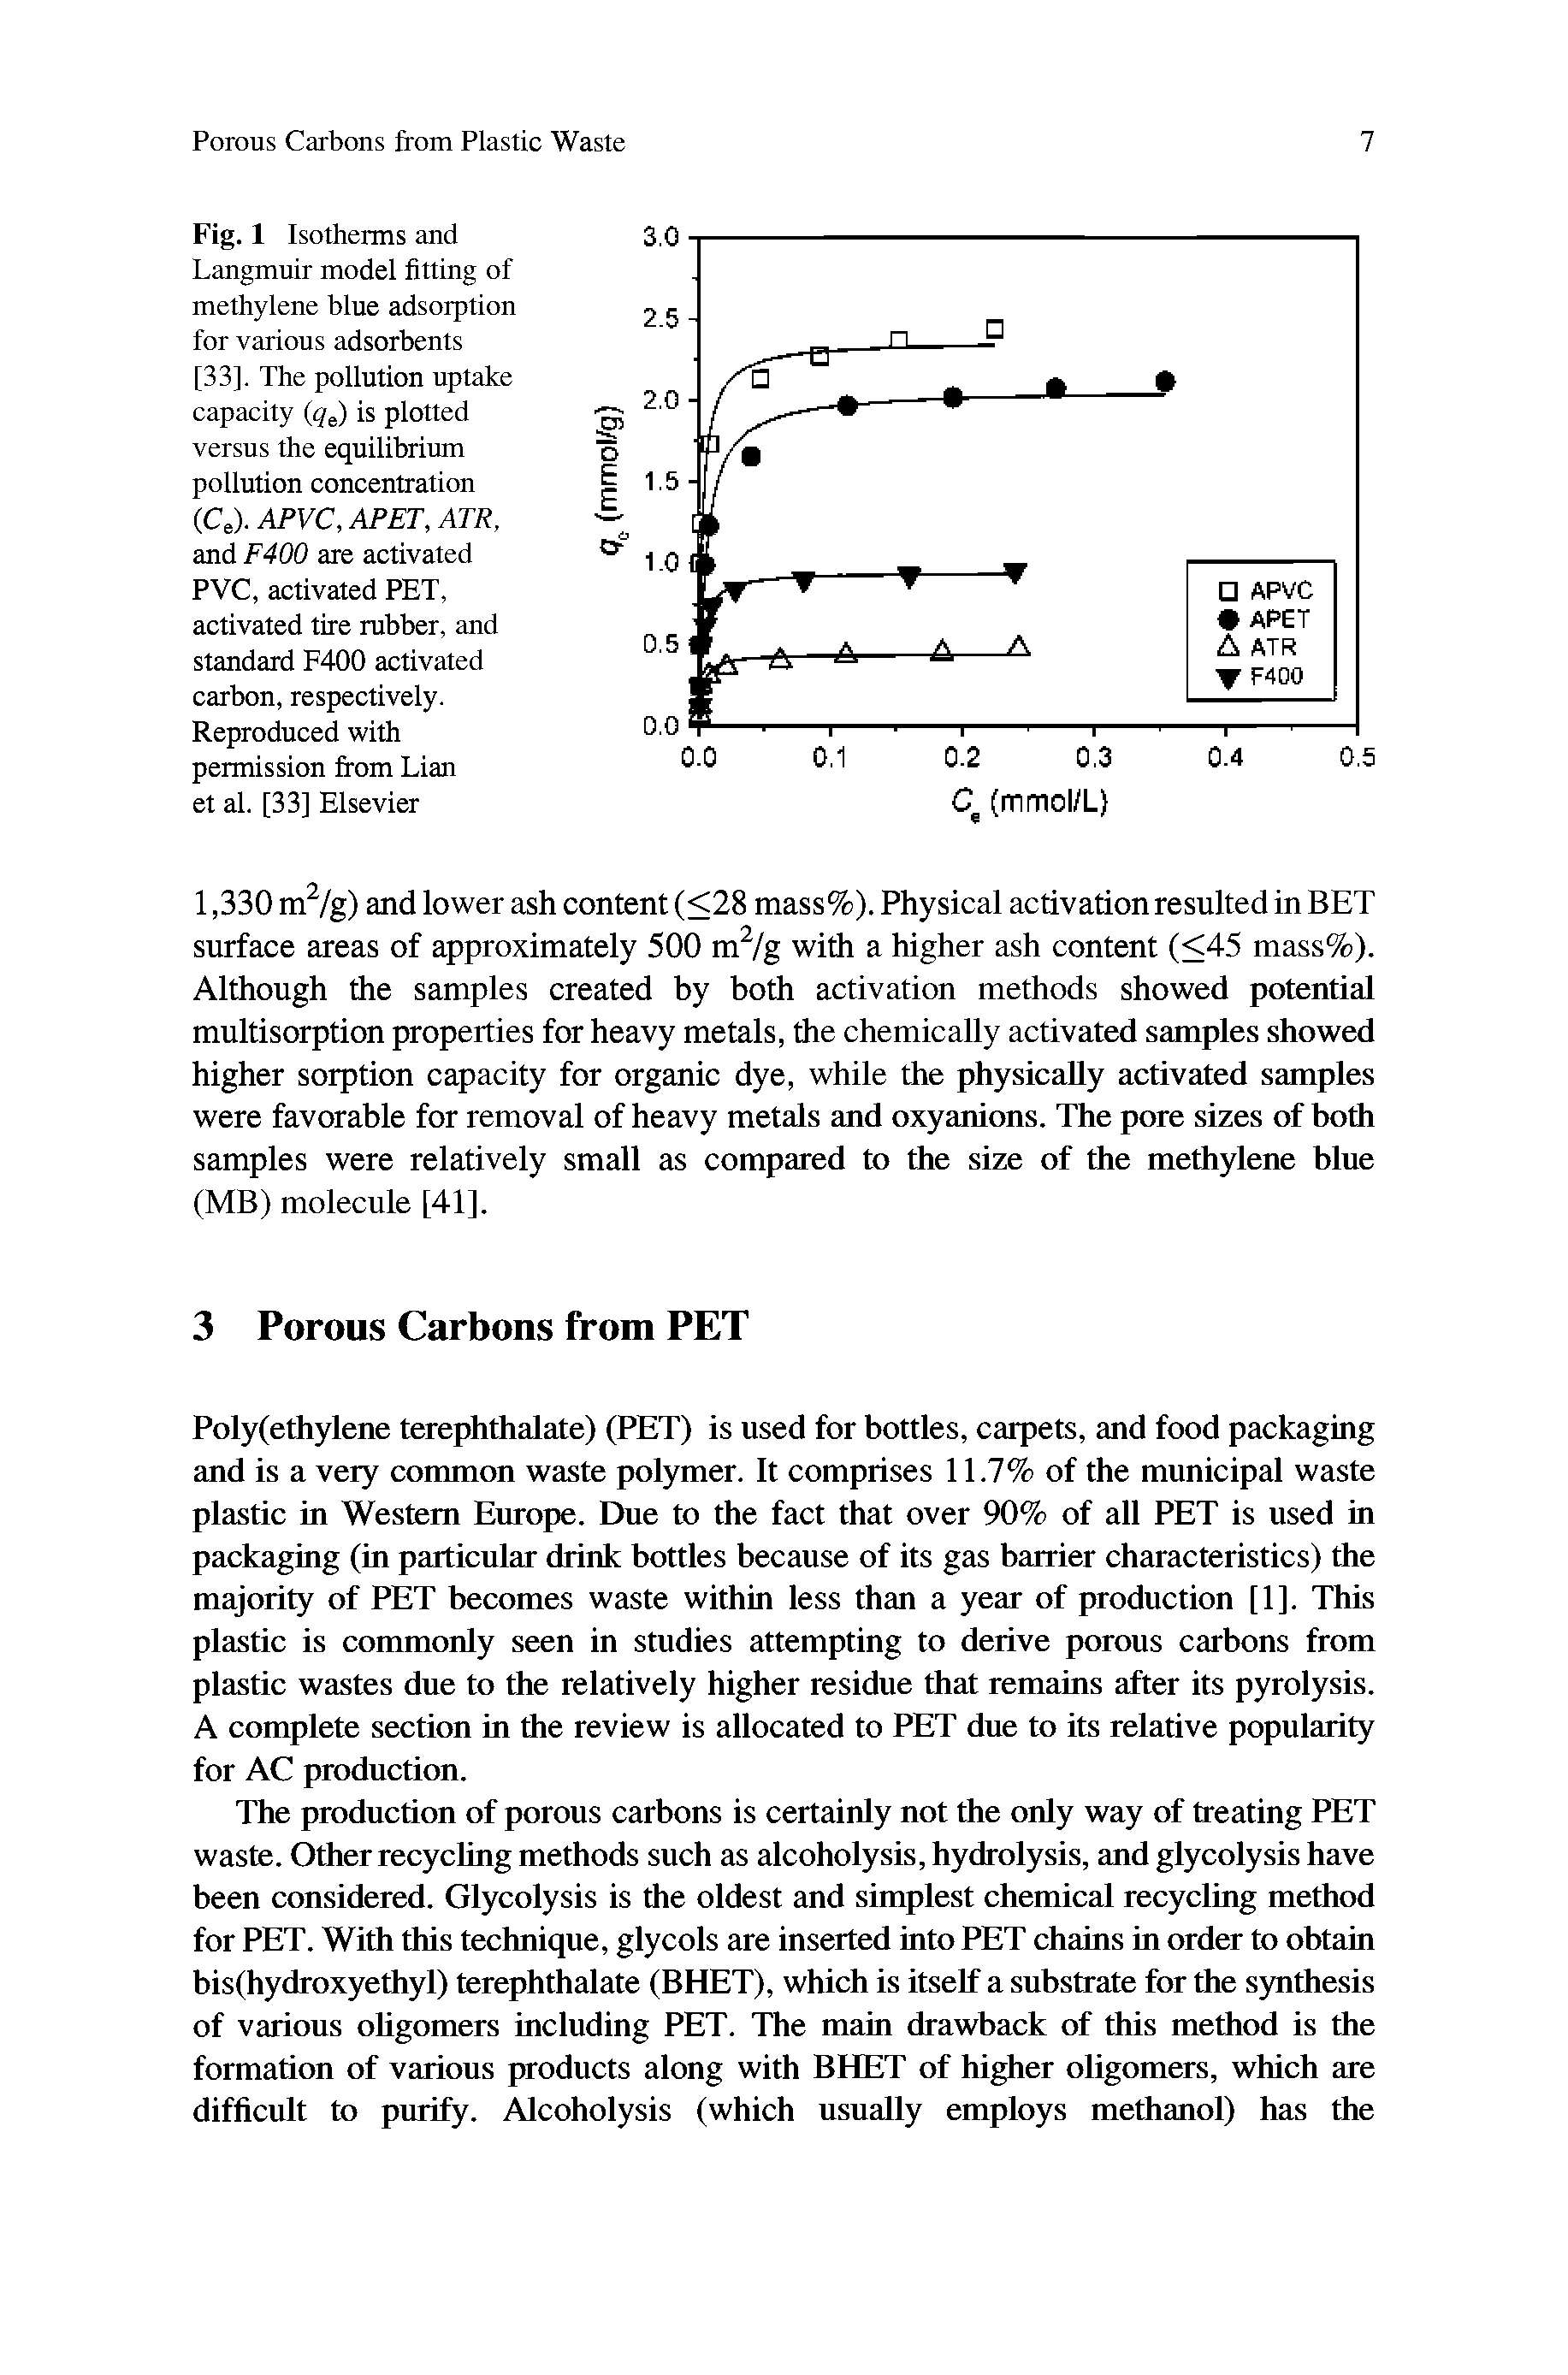 Fig. 1 Isotherms and Langmuir model fitting of methylene blue adsorption for various adsorbents [33]. The pollution uptake capacity is plotted versus the equilibrium pollution concentration (Ce). APVC, APET, ATR, and F400 are activated PVC, activated PET, activated tire rubber, and standard F400 activated carbon, respectively. Reproduced with permission from Lian et al. [33] Elsevier...